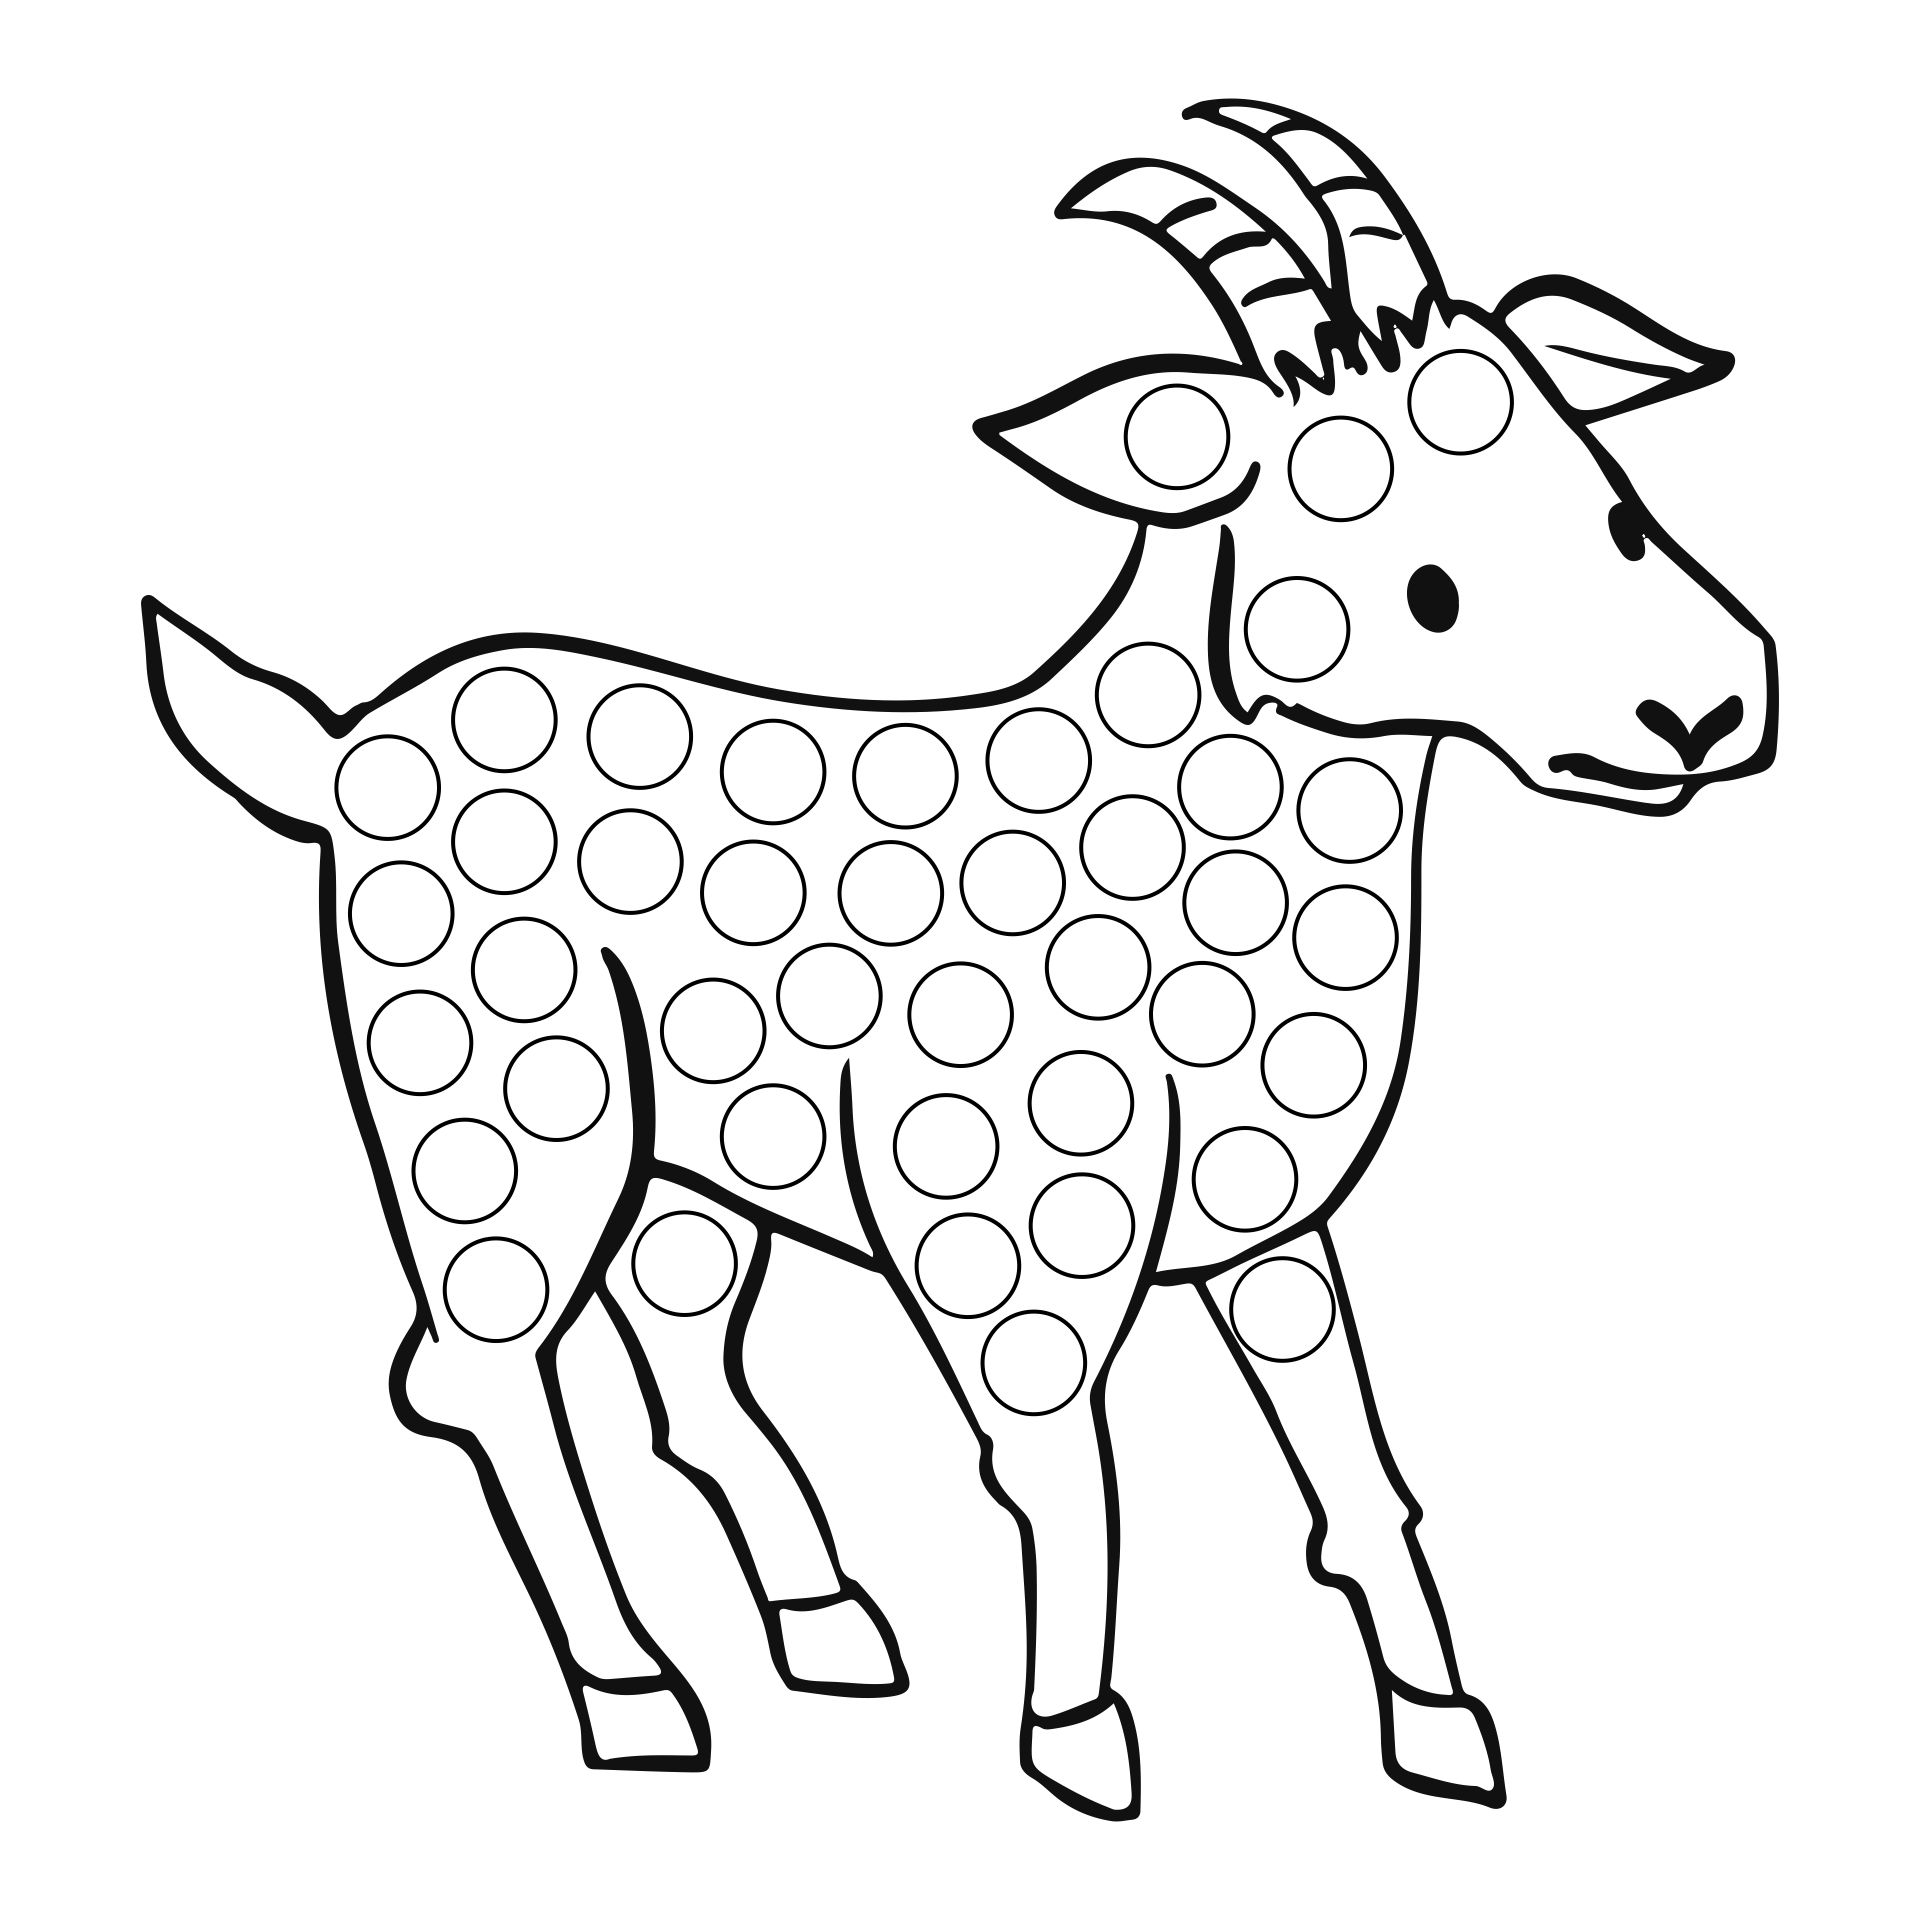 Printable Farm Animal Dot Marker Coloring Pages For Toddlers